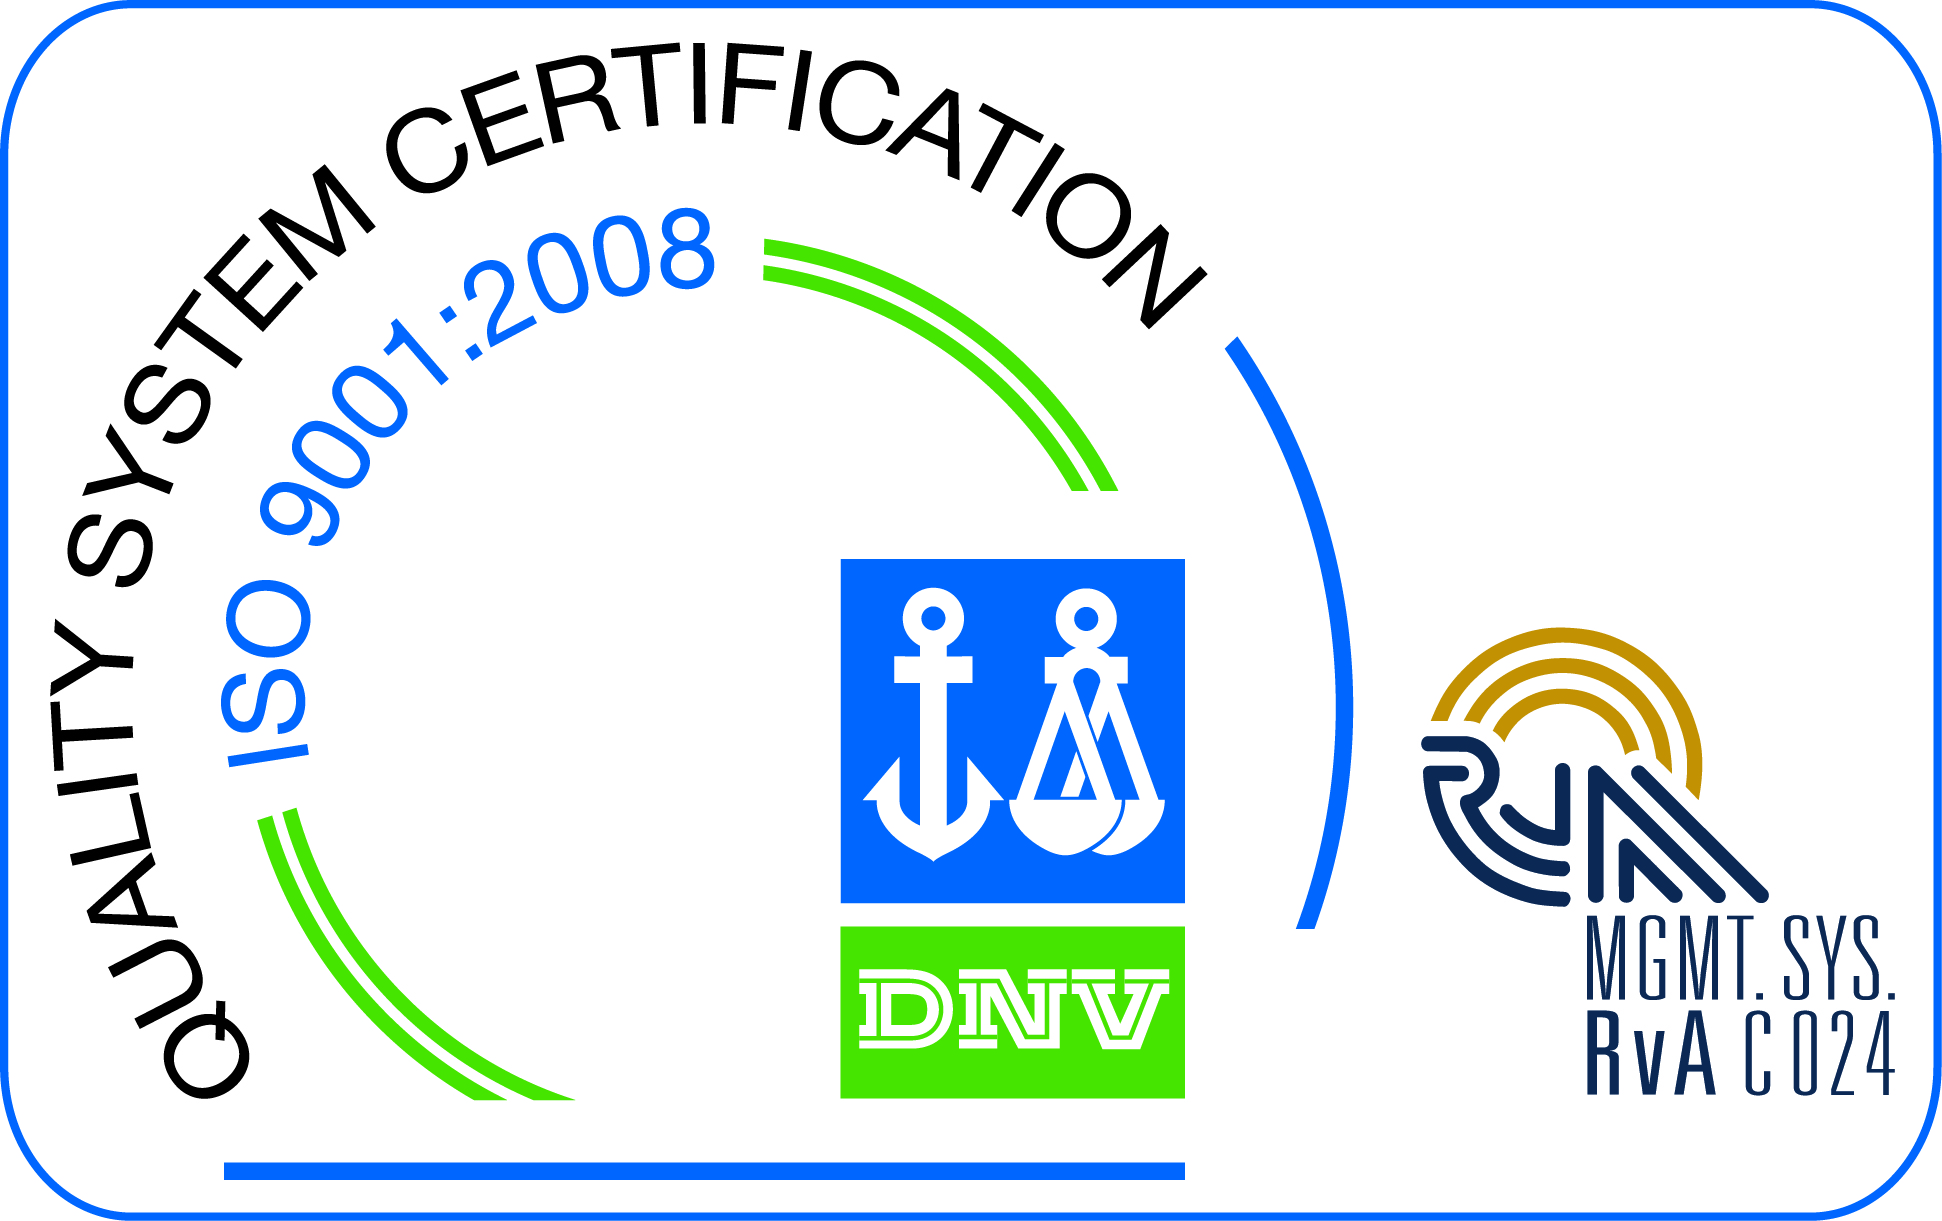 See a copy of Trinity Forge's RvA certificate to ISO-9001:2008